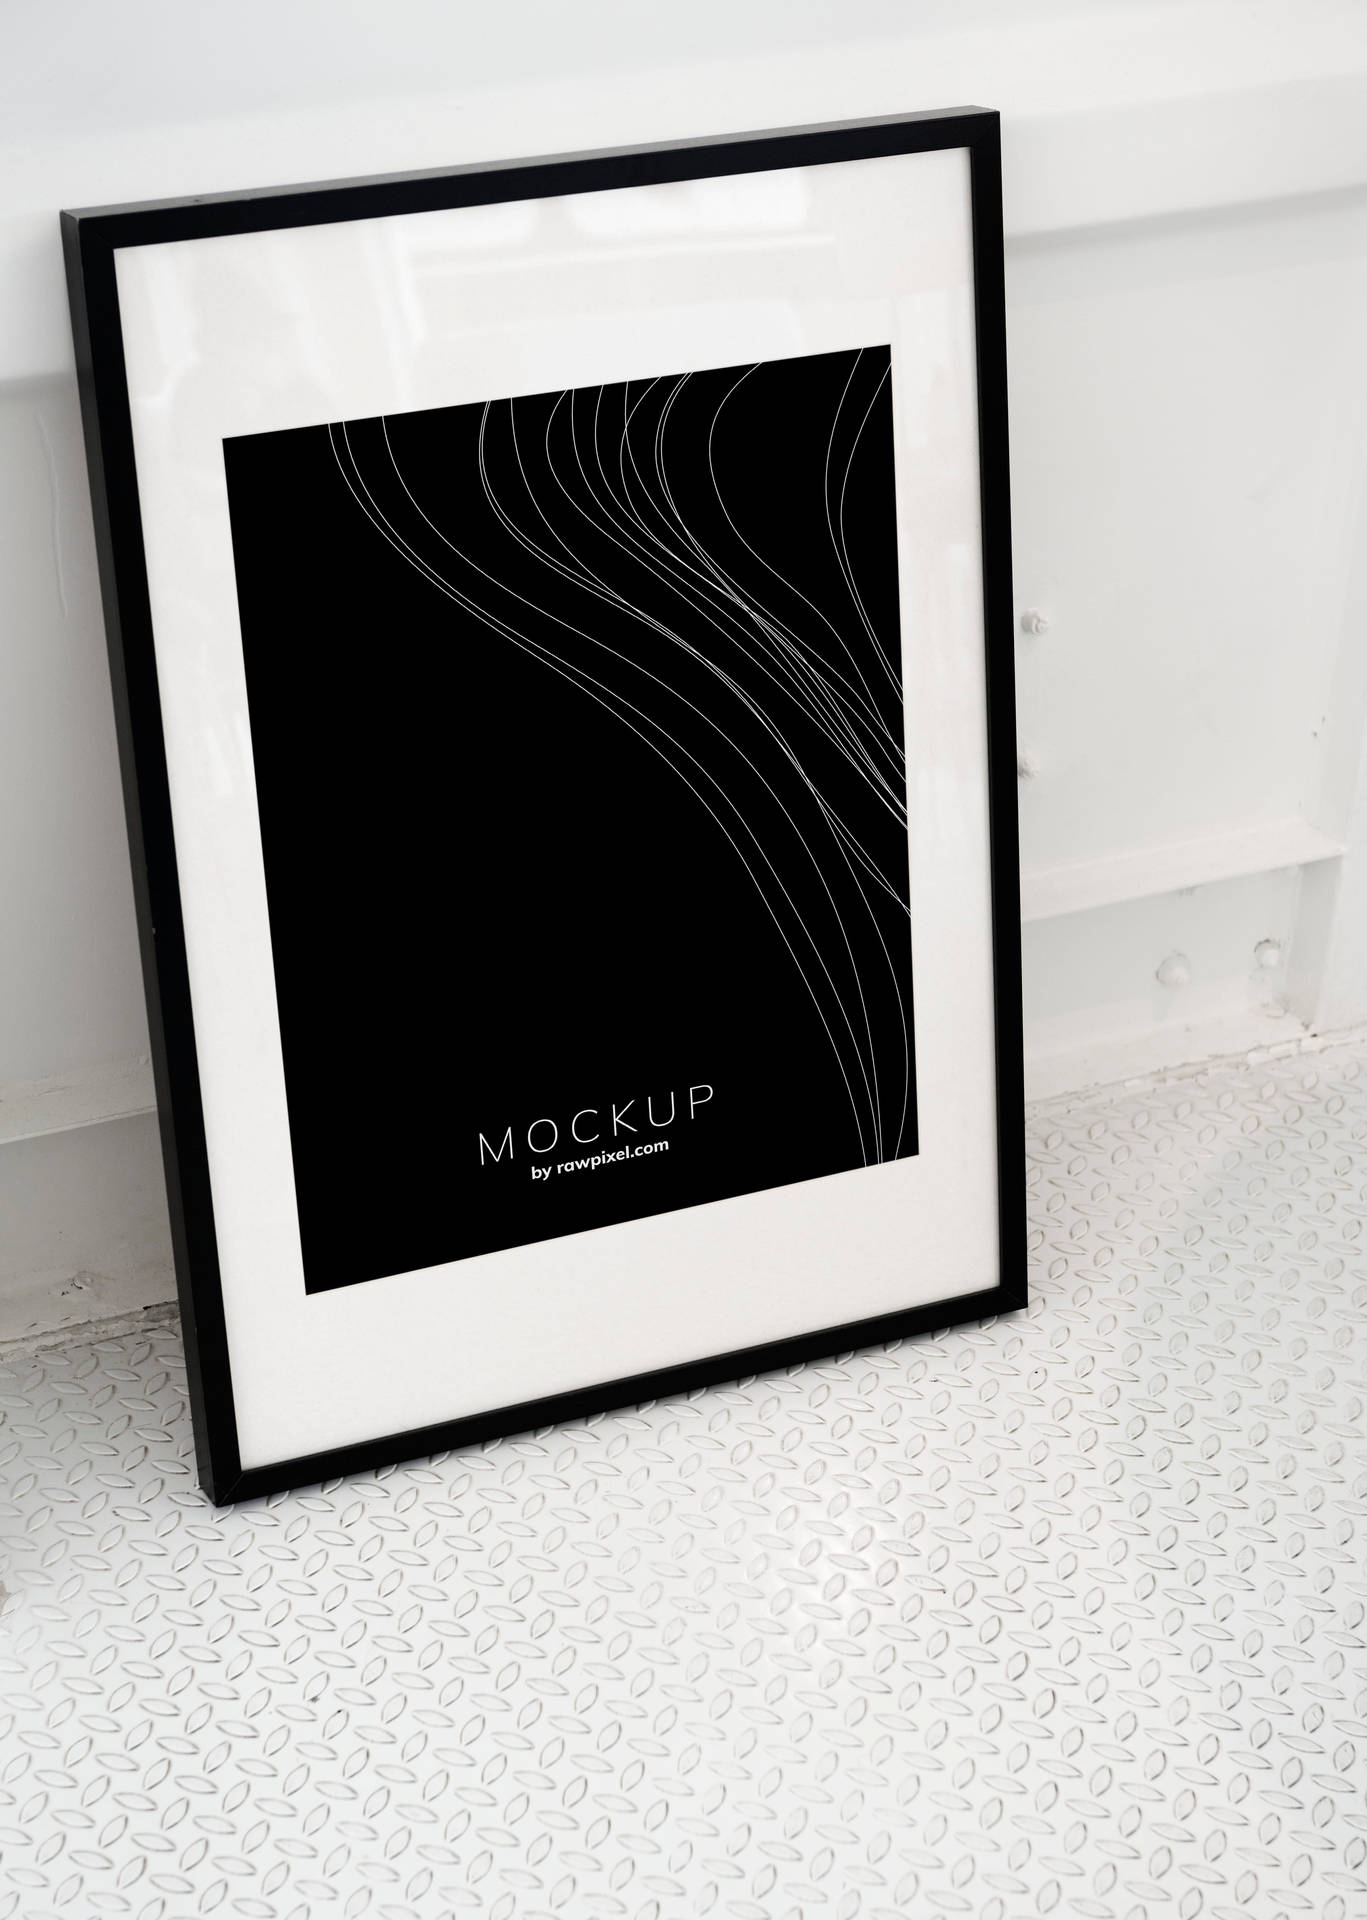 Mockup Pictures Wallpaper